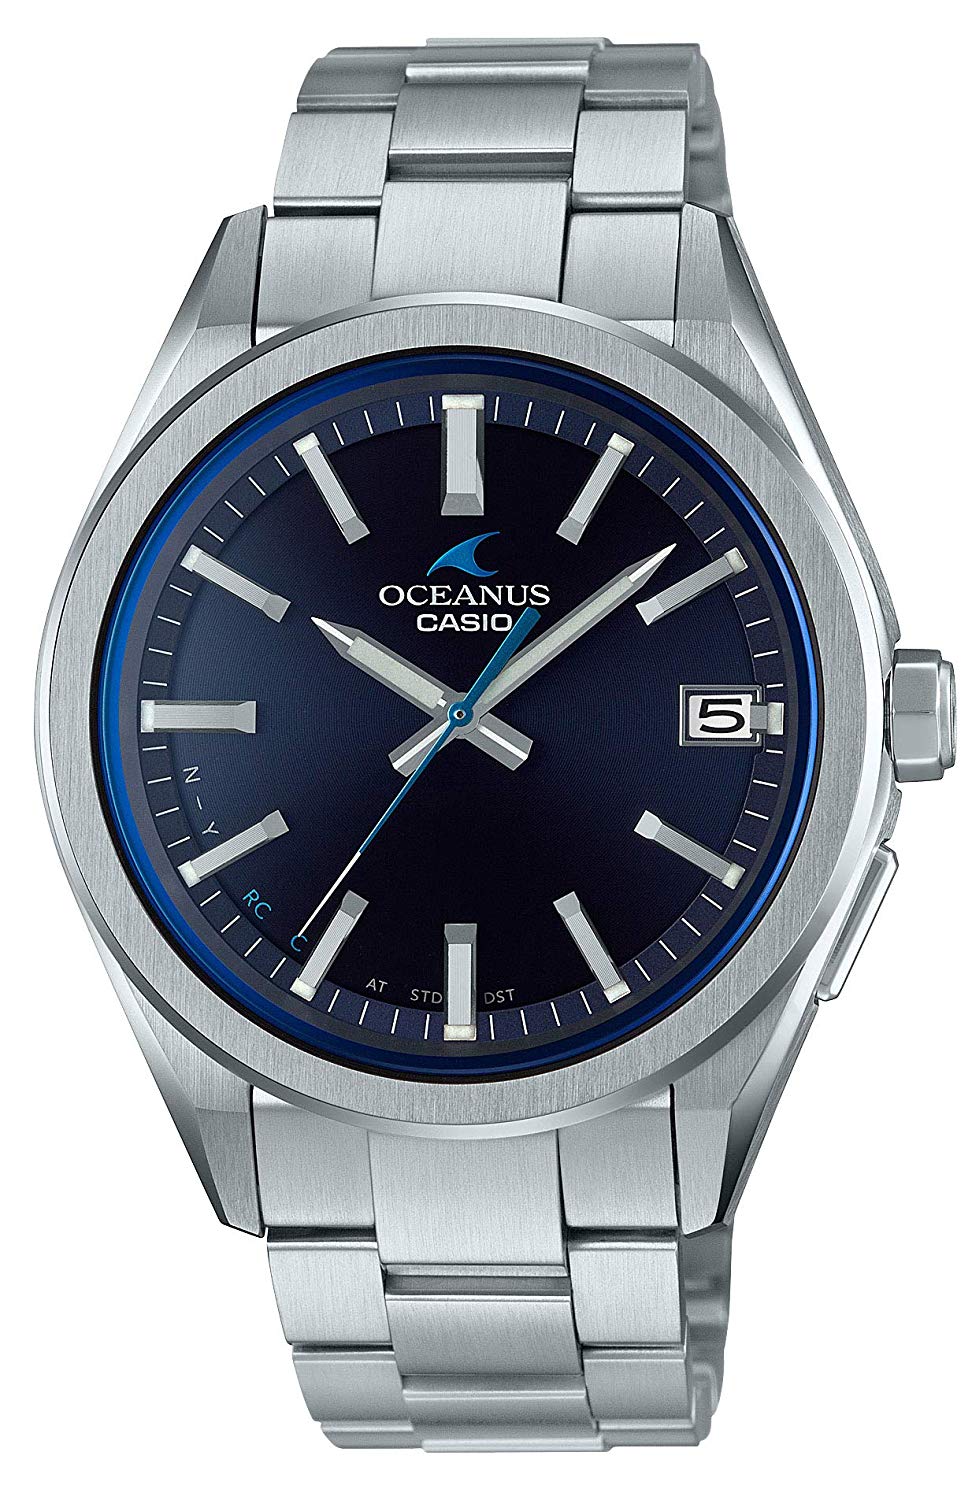 CASIO OCEANUS CLASSIC LINE Bluetooth equipped radio solar OCW-T200S-1AJF  Men s Silver - Discovery Japan Mall